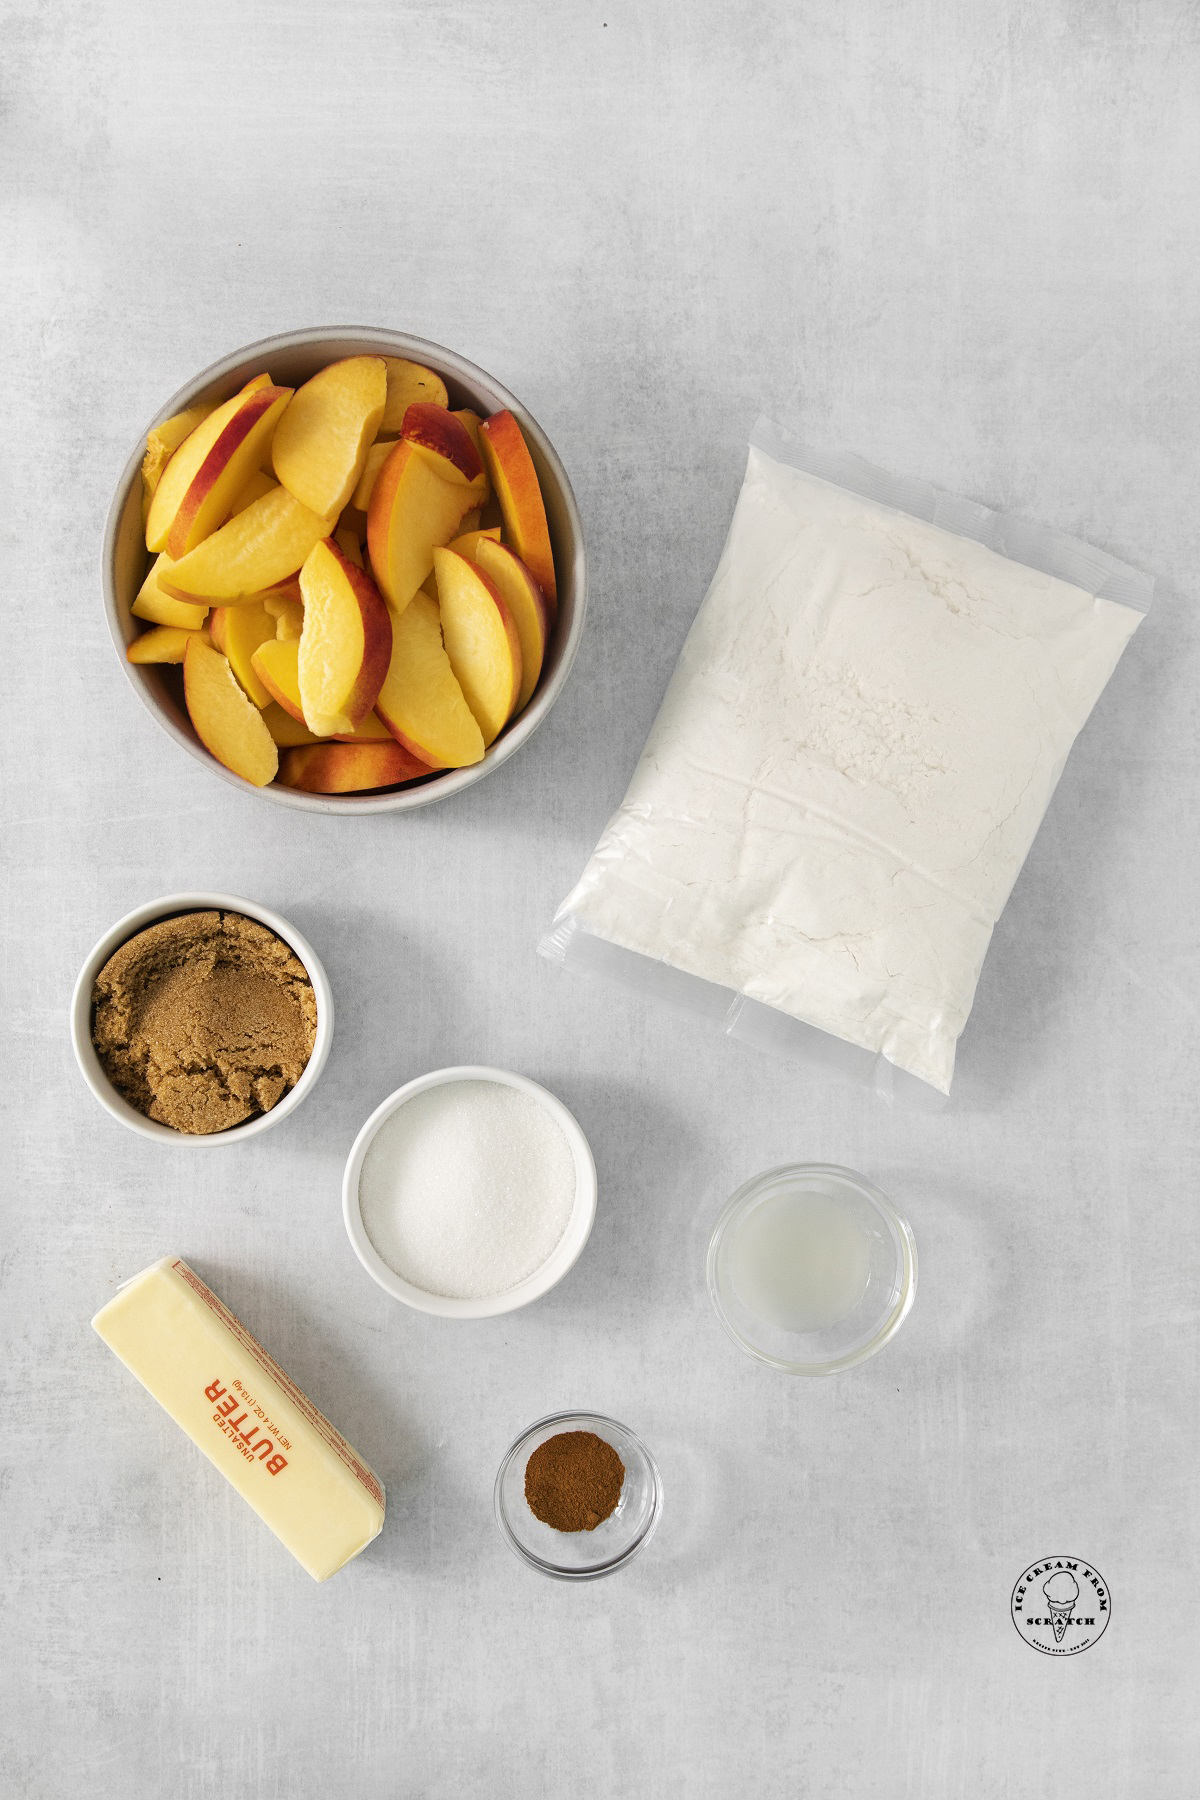 The ingredients needed to make crockpot peach cobbler with fresh peaches, cake mix, butter, and sugar.